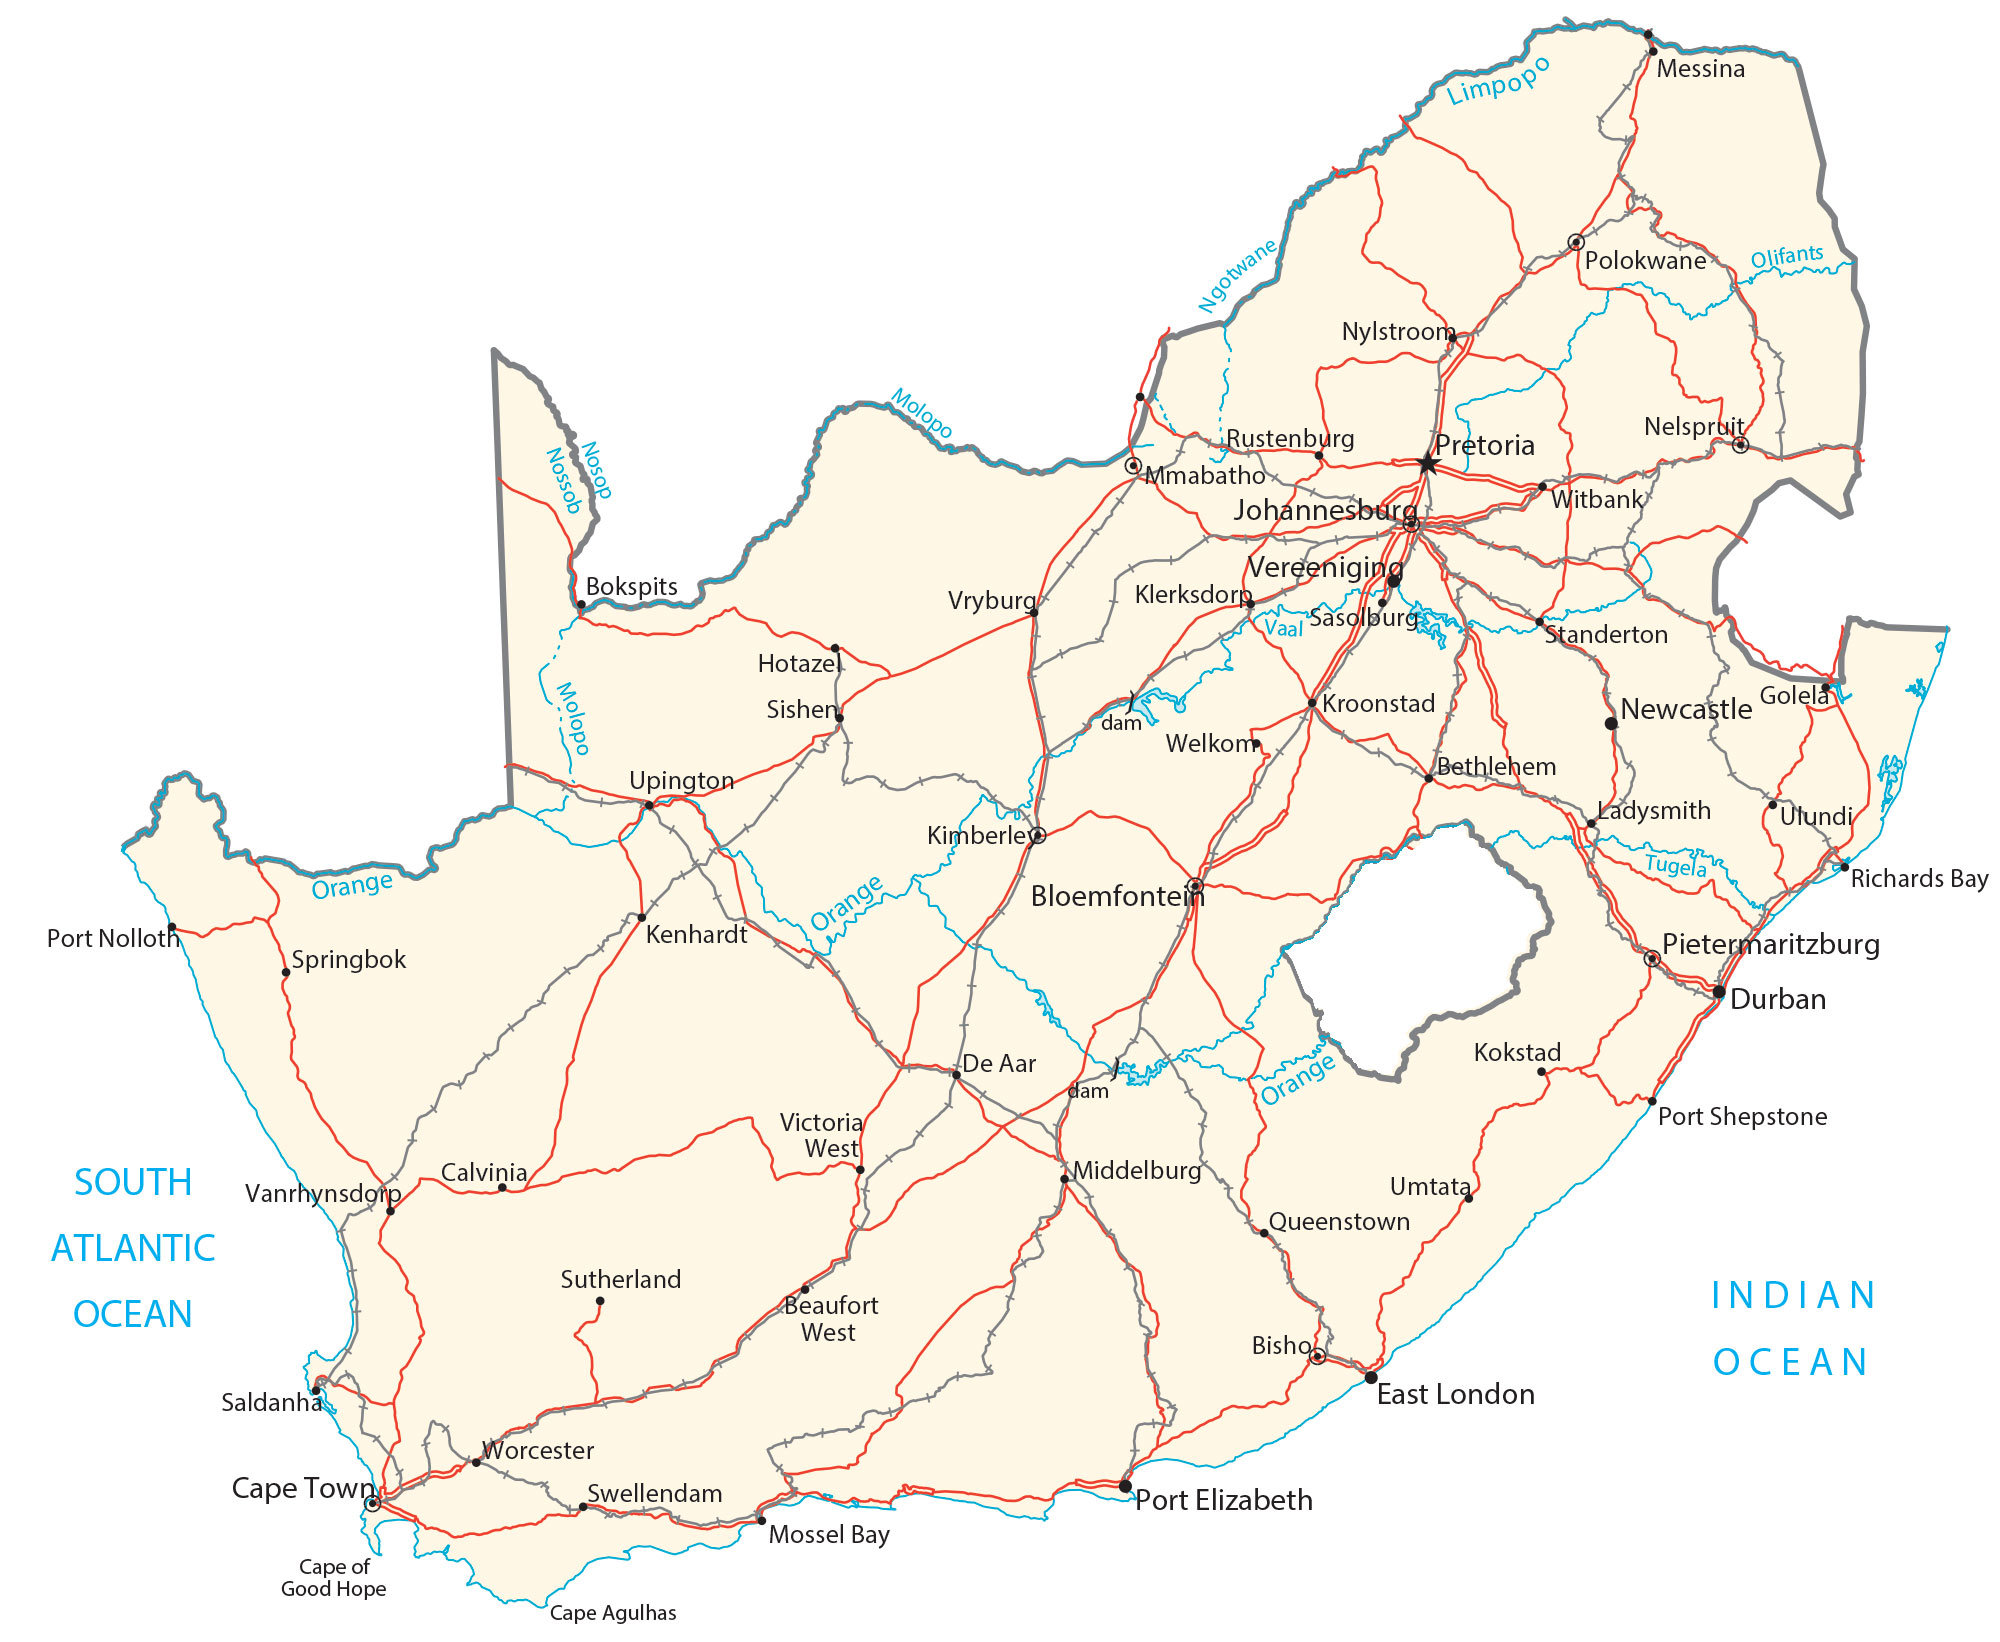 Provincial or National Road Proclamation / Diagram for a single property -  City of Johannesburg